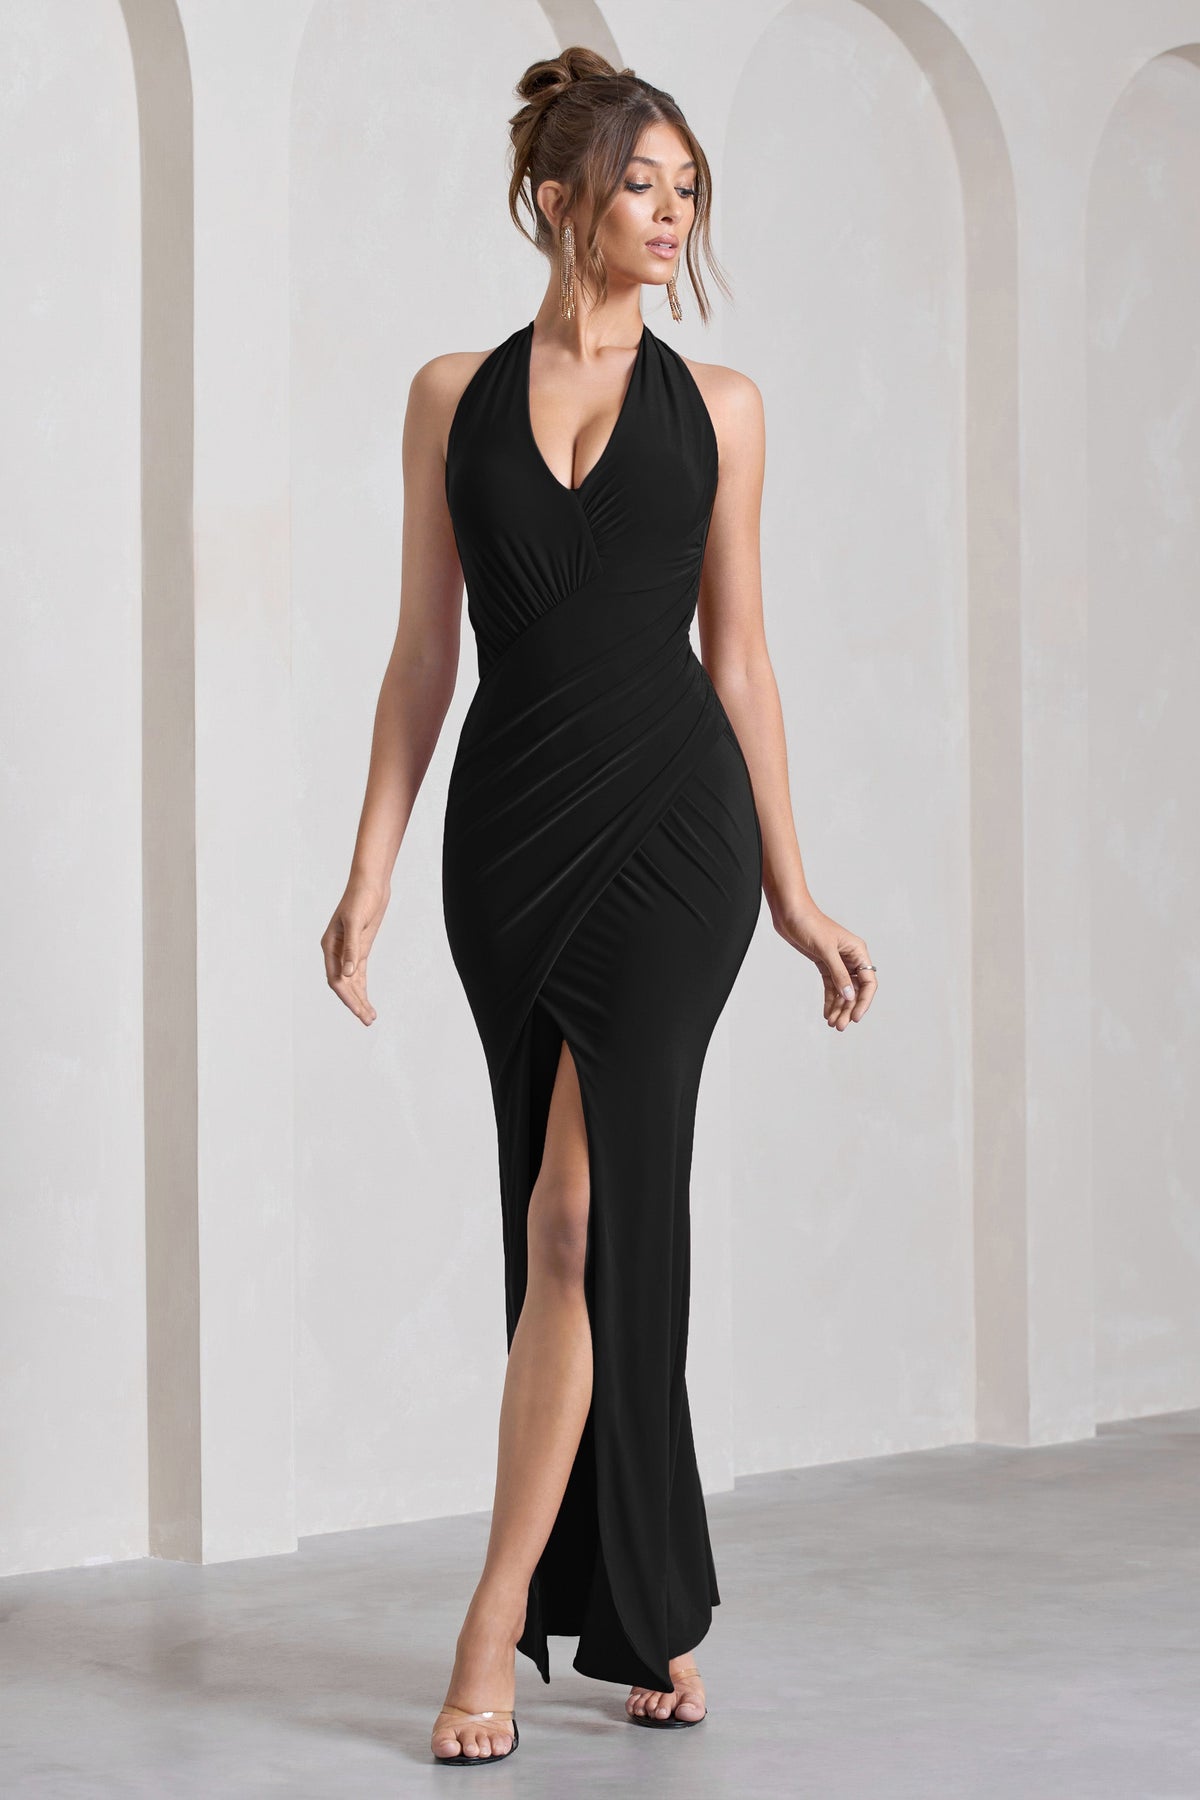 All About Me Backless Maxi Slit Dress - Black - $38